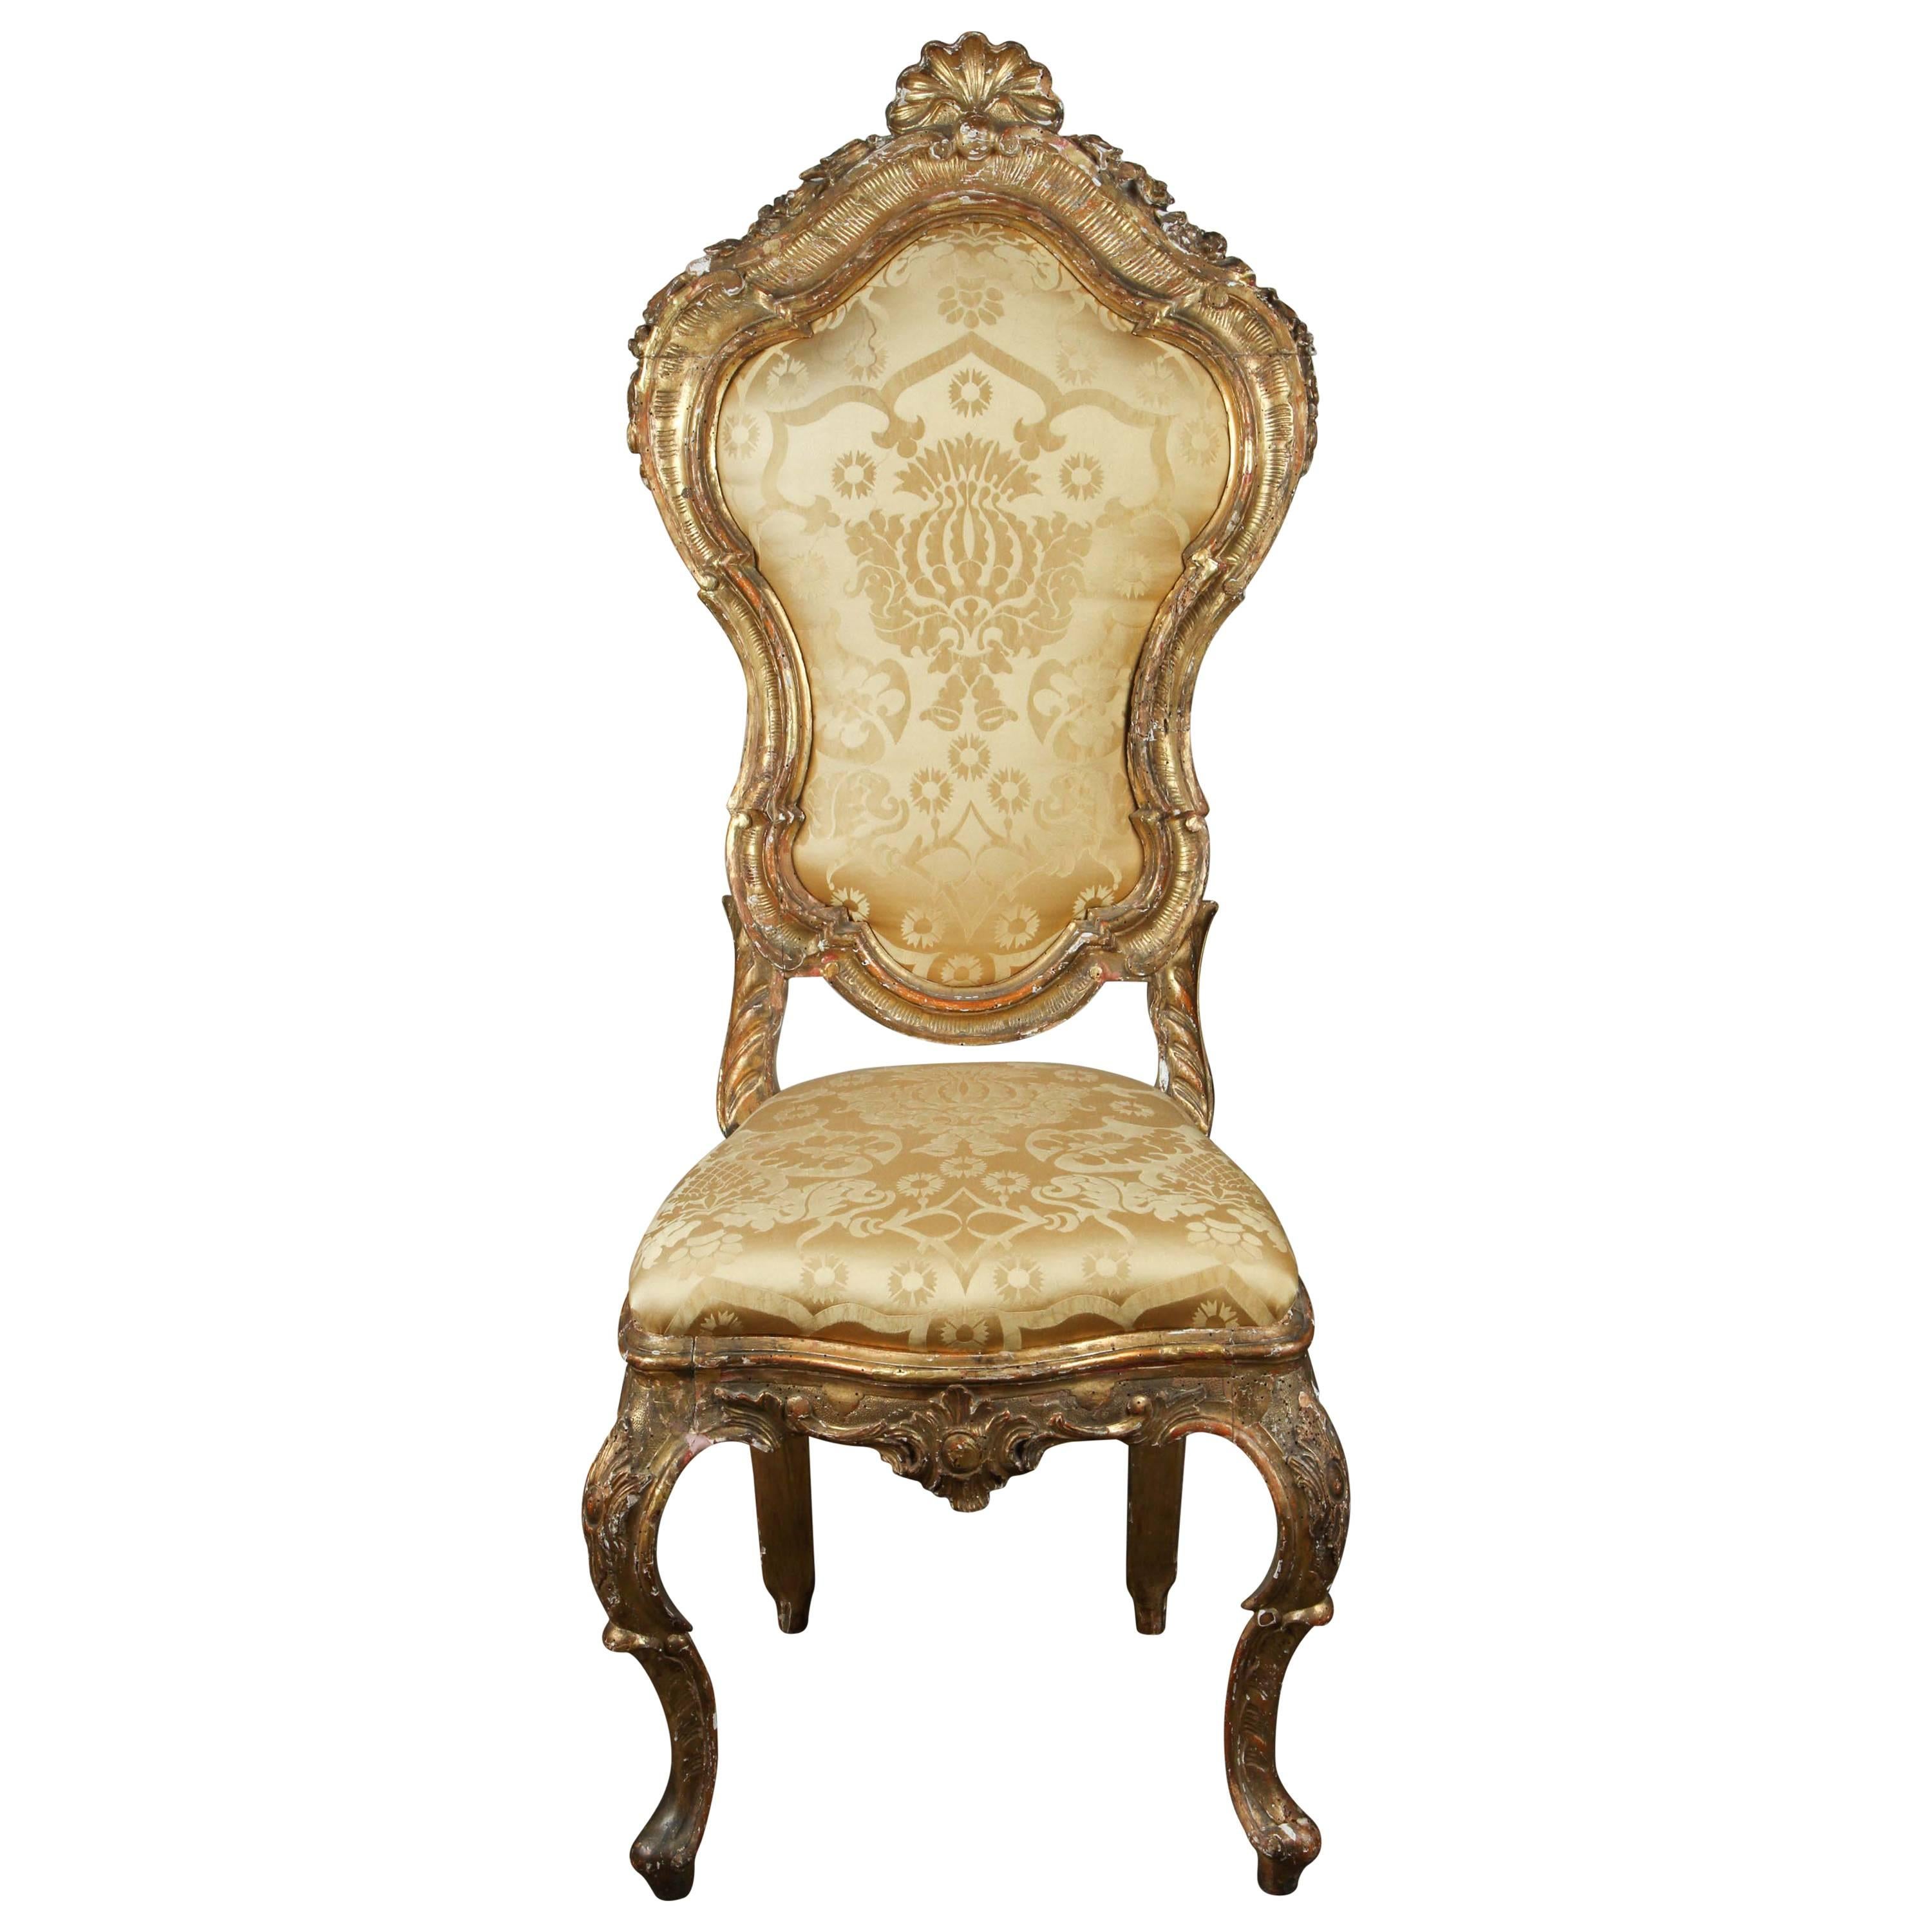 What are French chairs called?